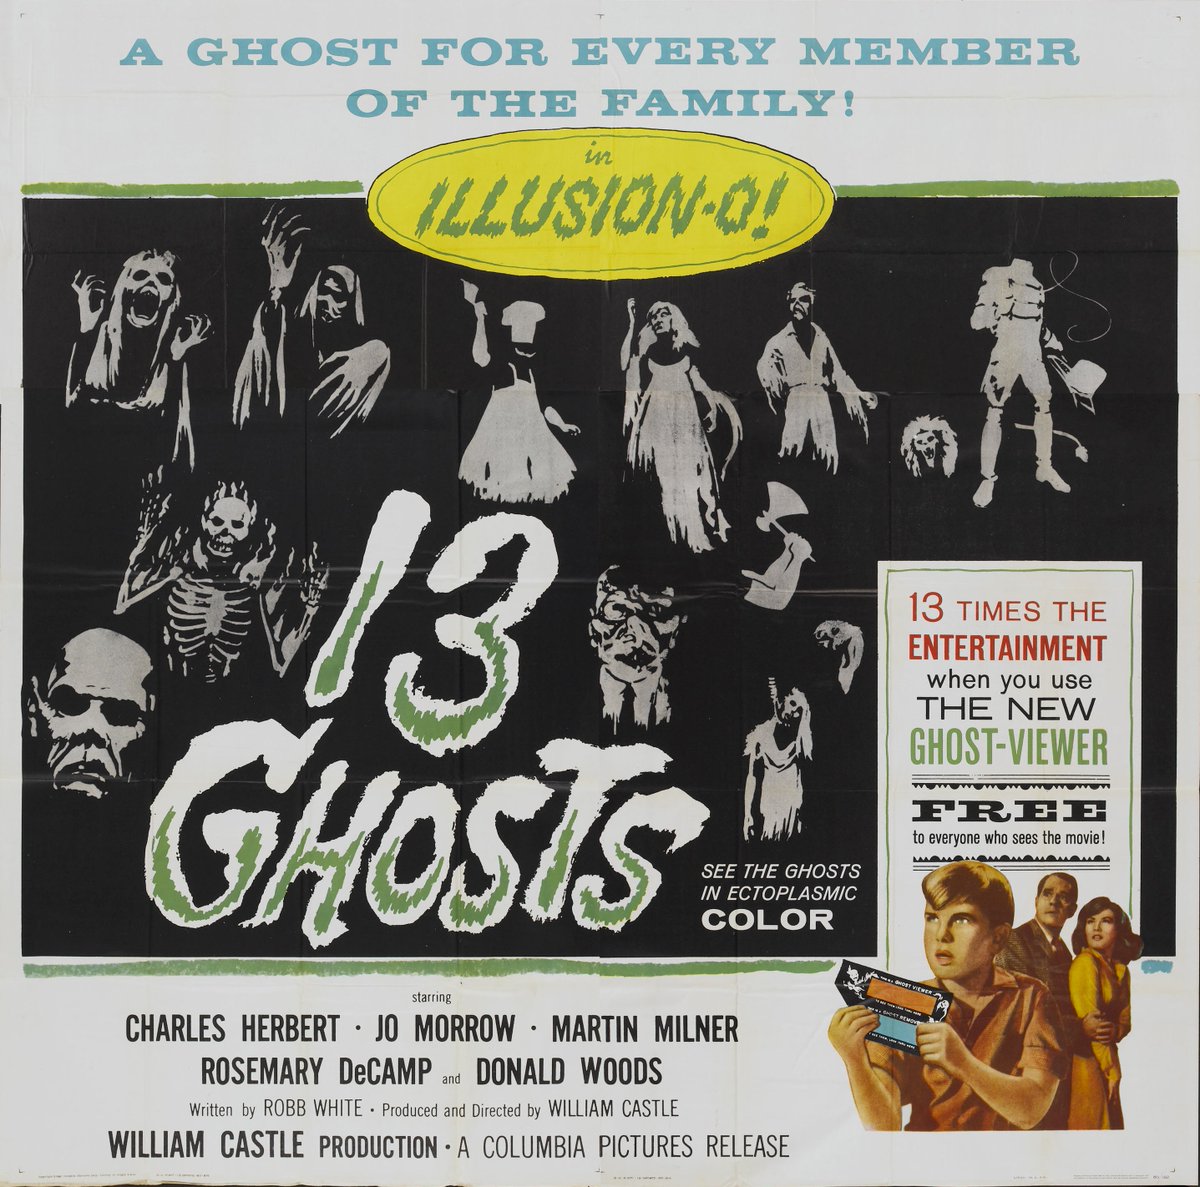 13 Ghosts (Columbia, 1960)
Six Sheet (81' X 81')
.
#TerrorByNight #13Ghosts #WilliamCastle #ClassicHorror #VintageHorror #MonsterKid 
.